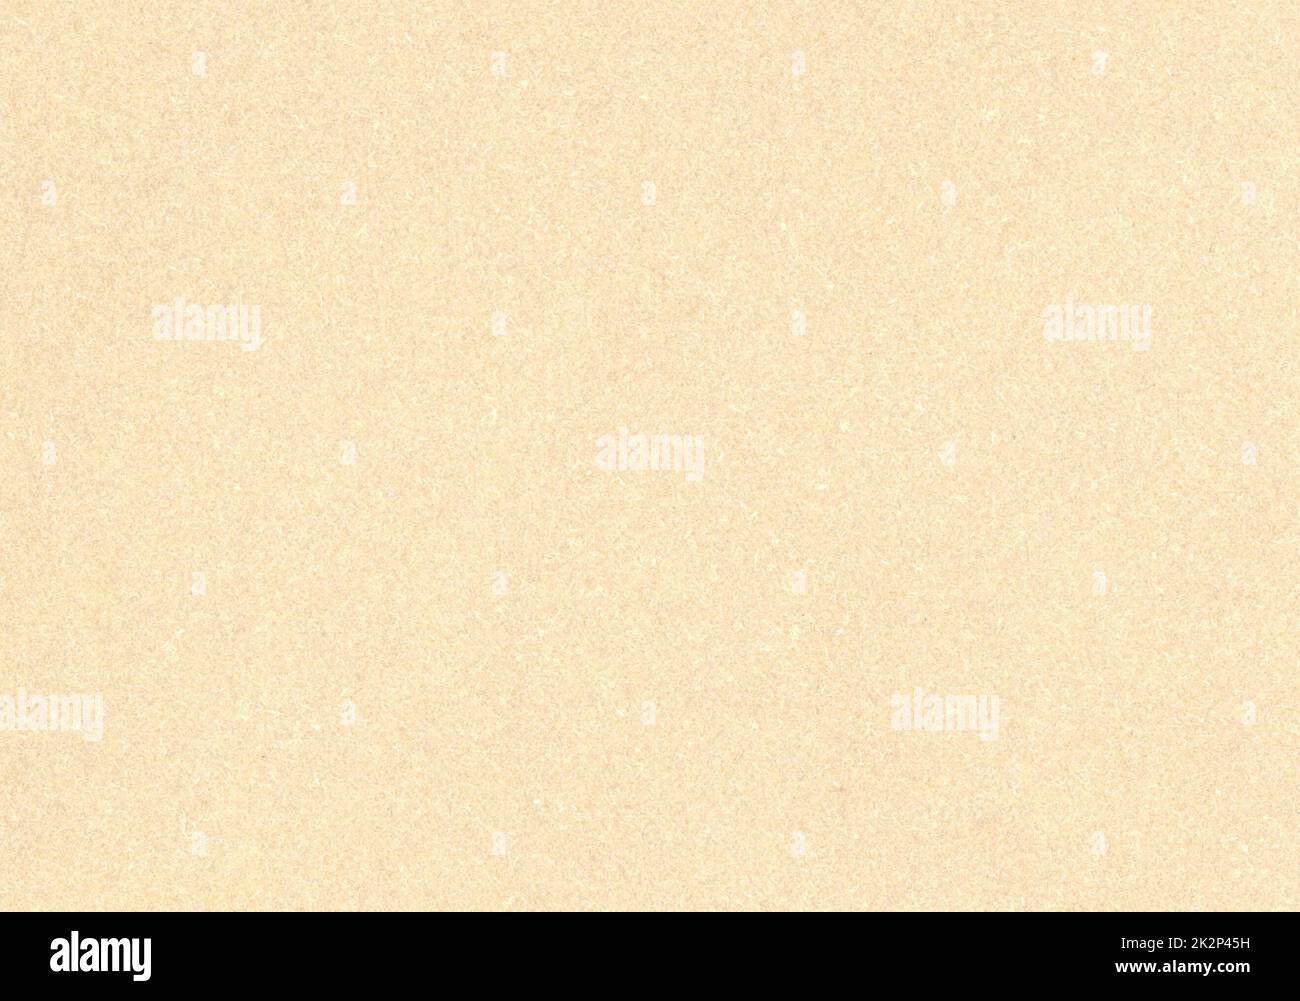 Highly detailed high resolution close up uncoated paper texture background sand brown beige smooth fine grain fiber with copy space for text presentation wallpaper or mockup Stock Photo